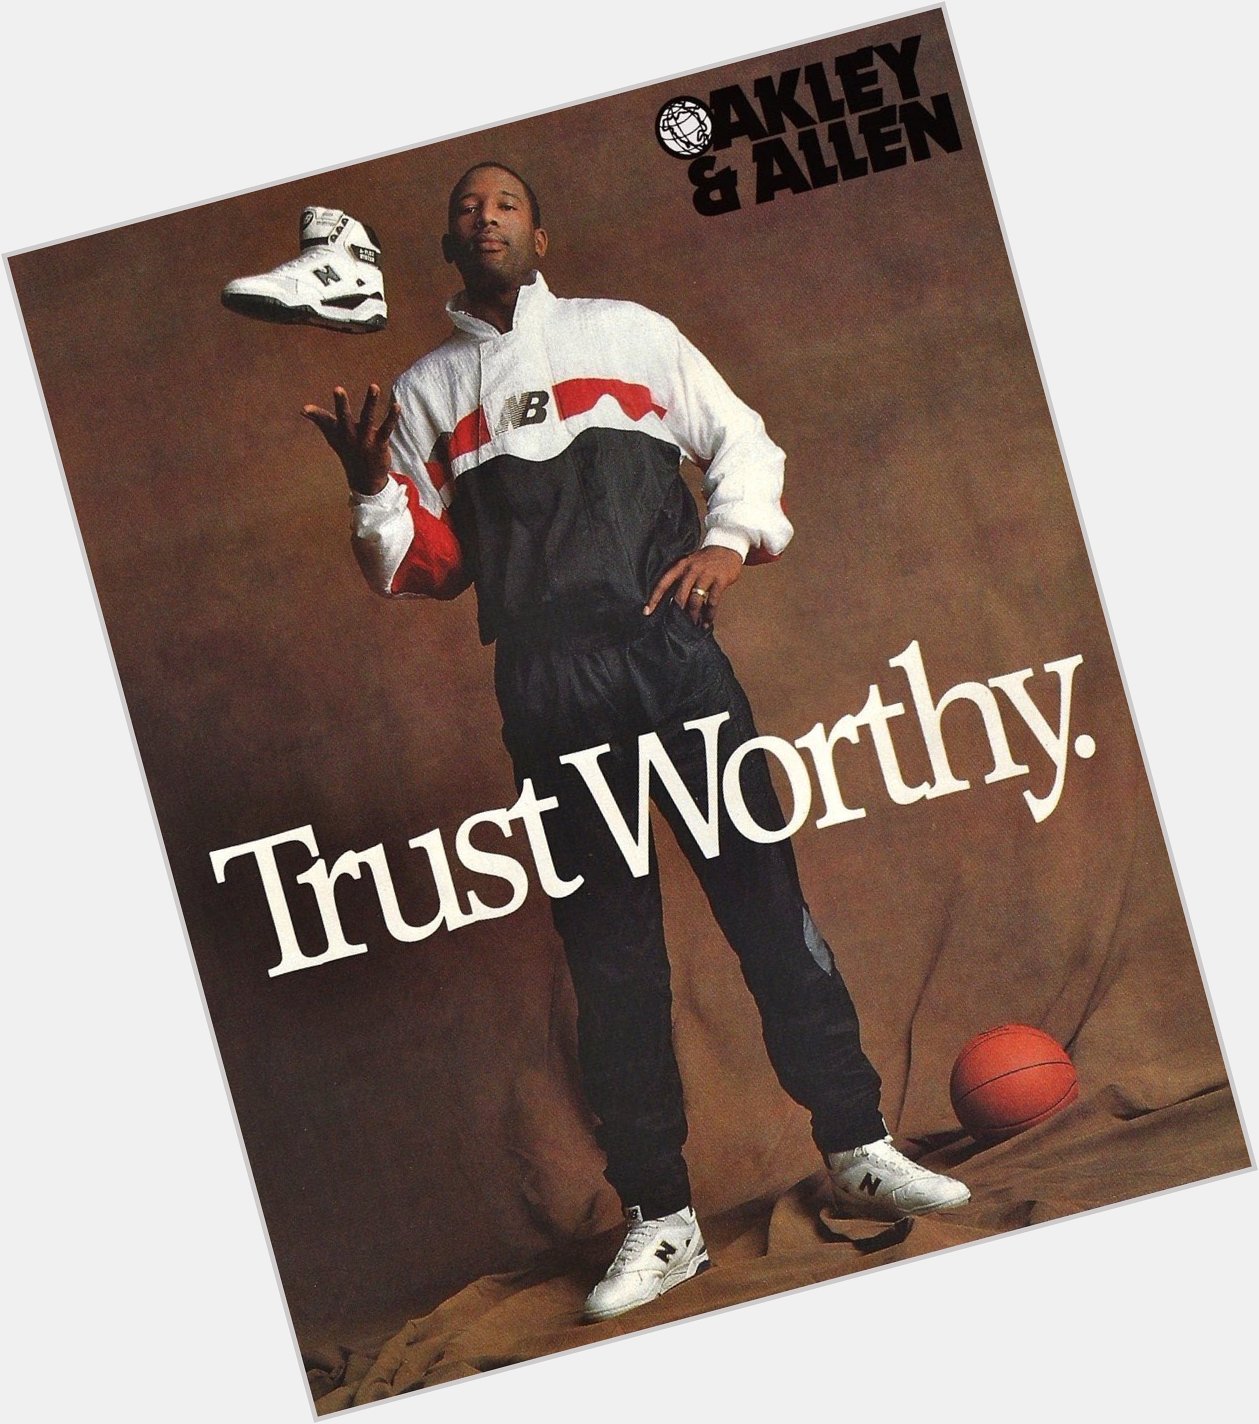 Happy Birthday to James Worthy!
Had some great New Balance posters 